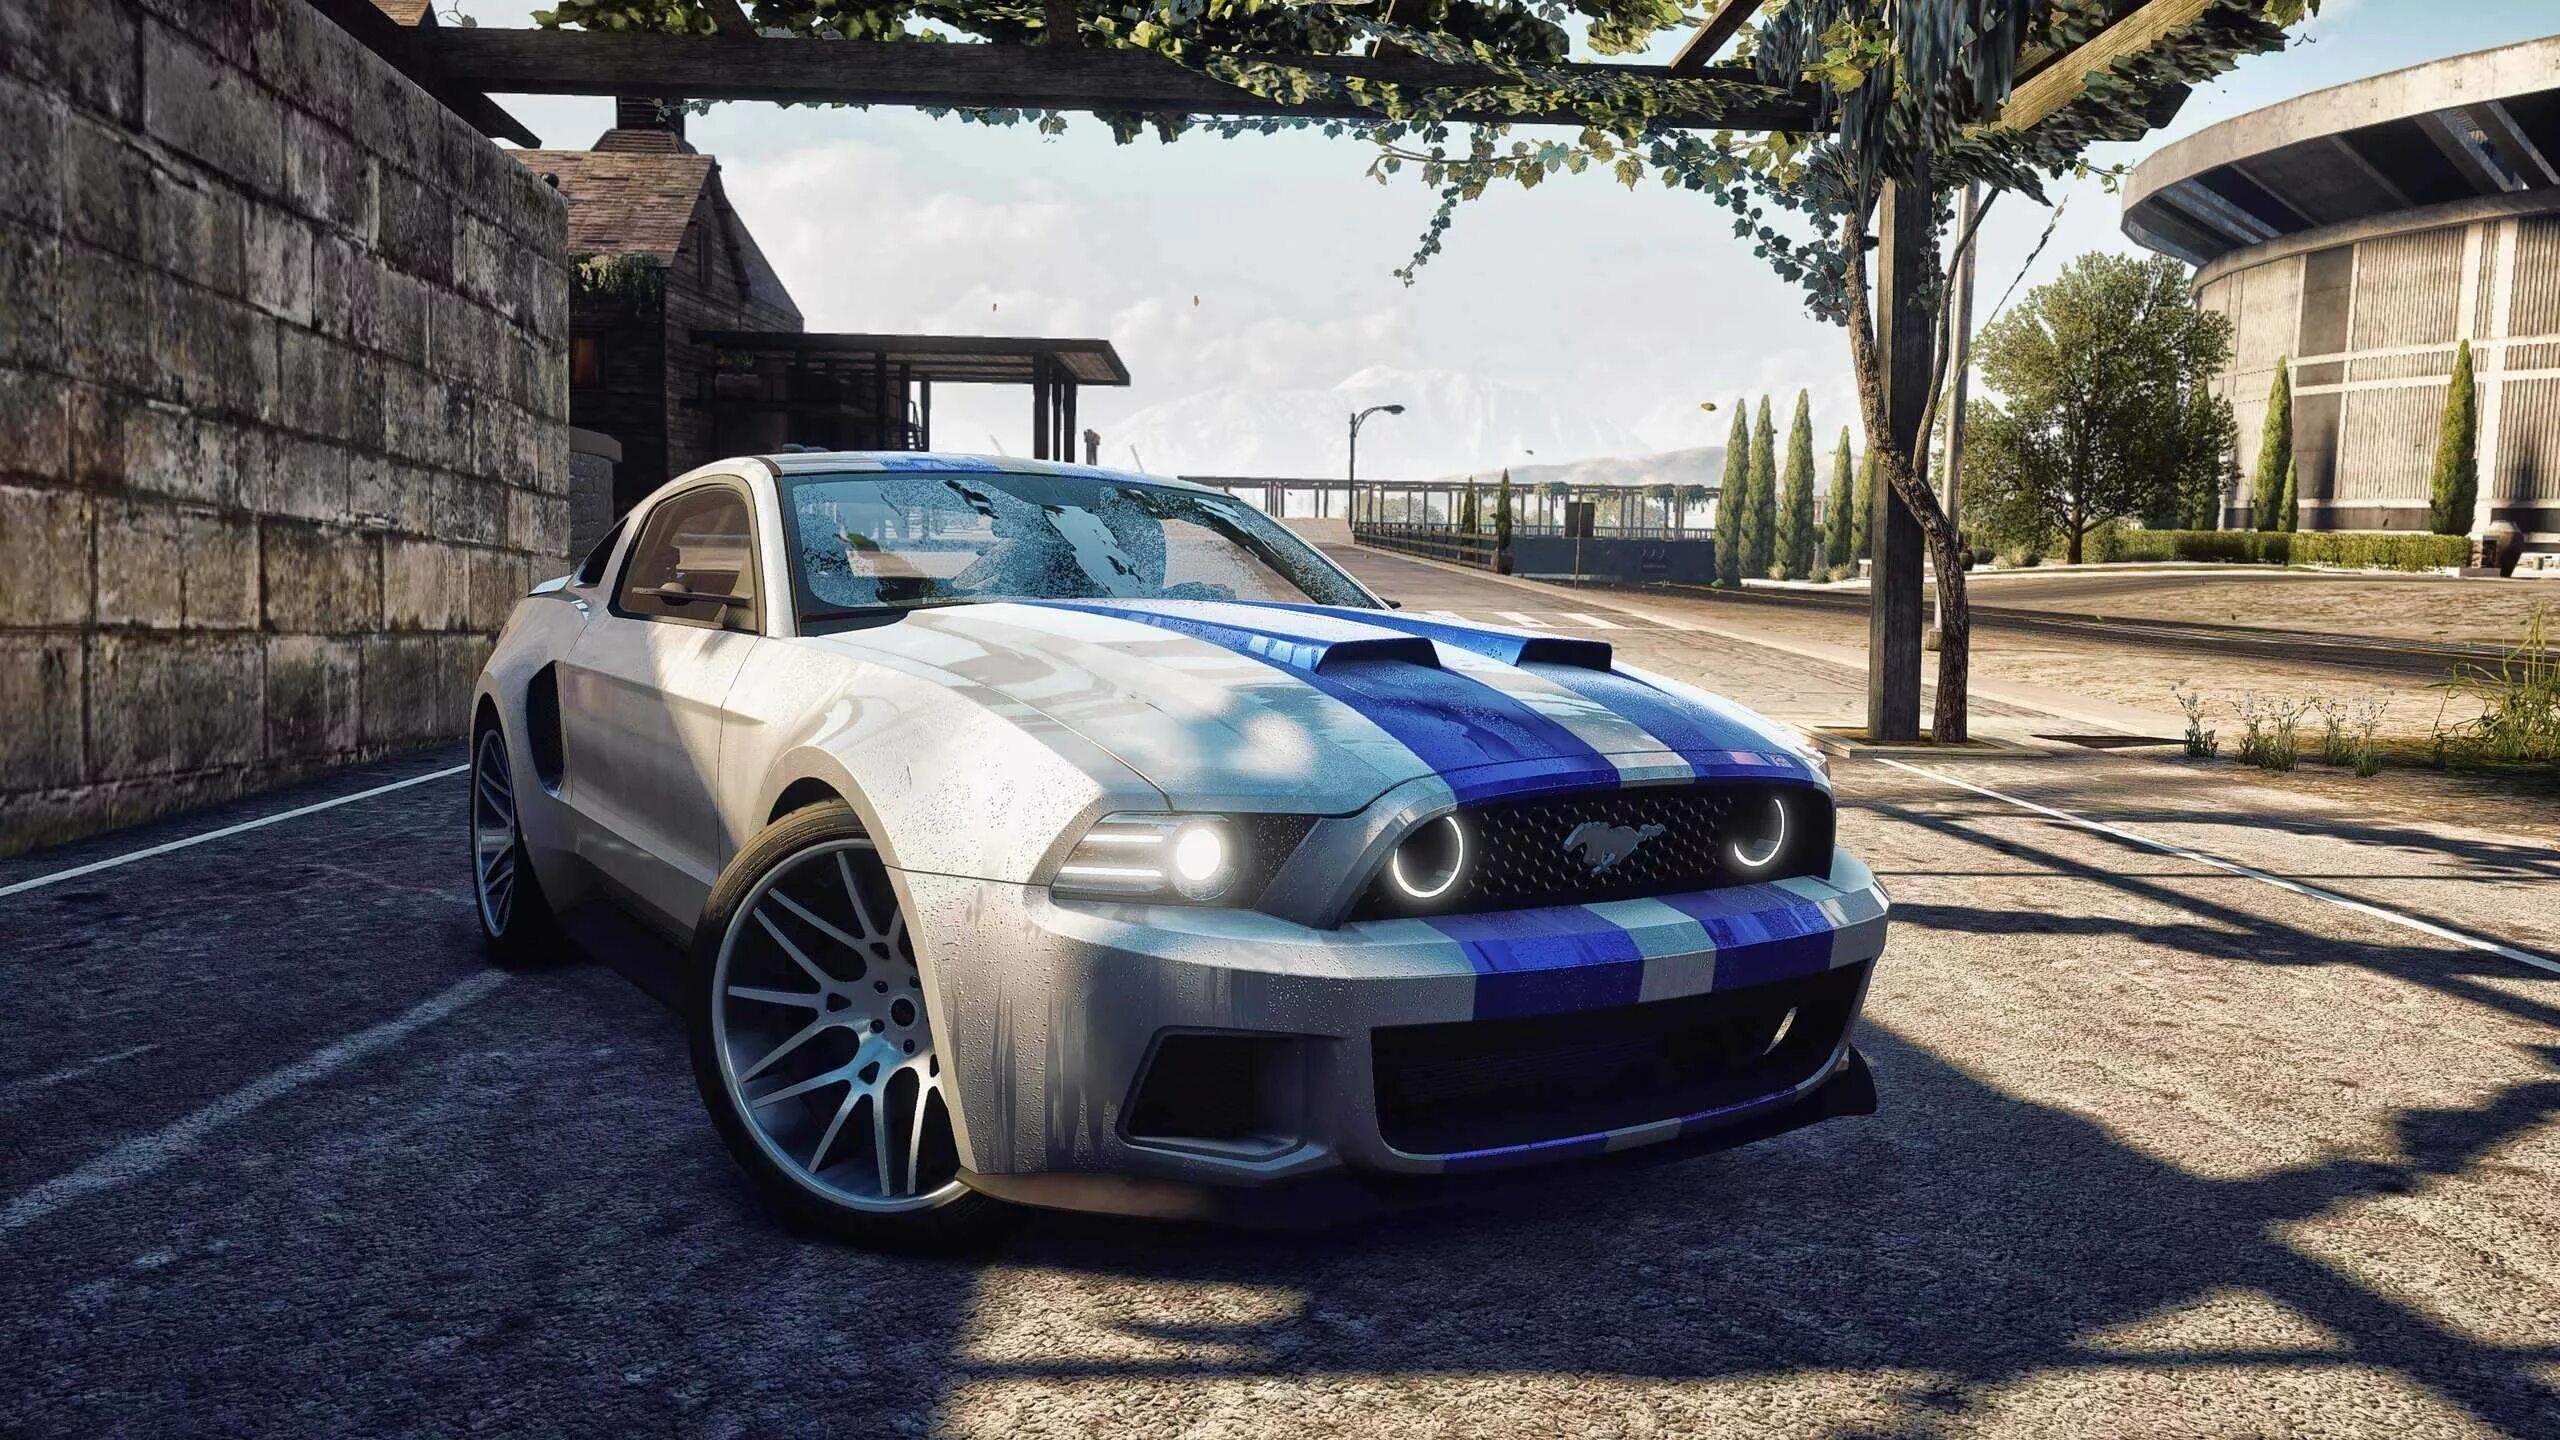 Need for speed мустанг. Ford Mustang NFS. Мустанг из need for Speed. Ford Mustang gt 2014 NFS Rivals. NFS Rivals Ford Mustang Shelby.